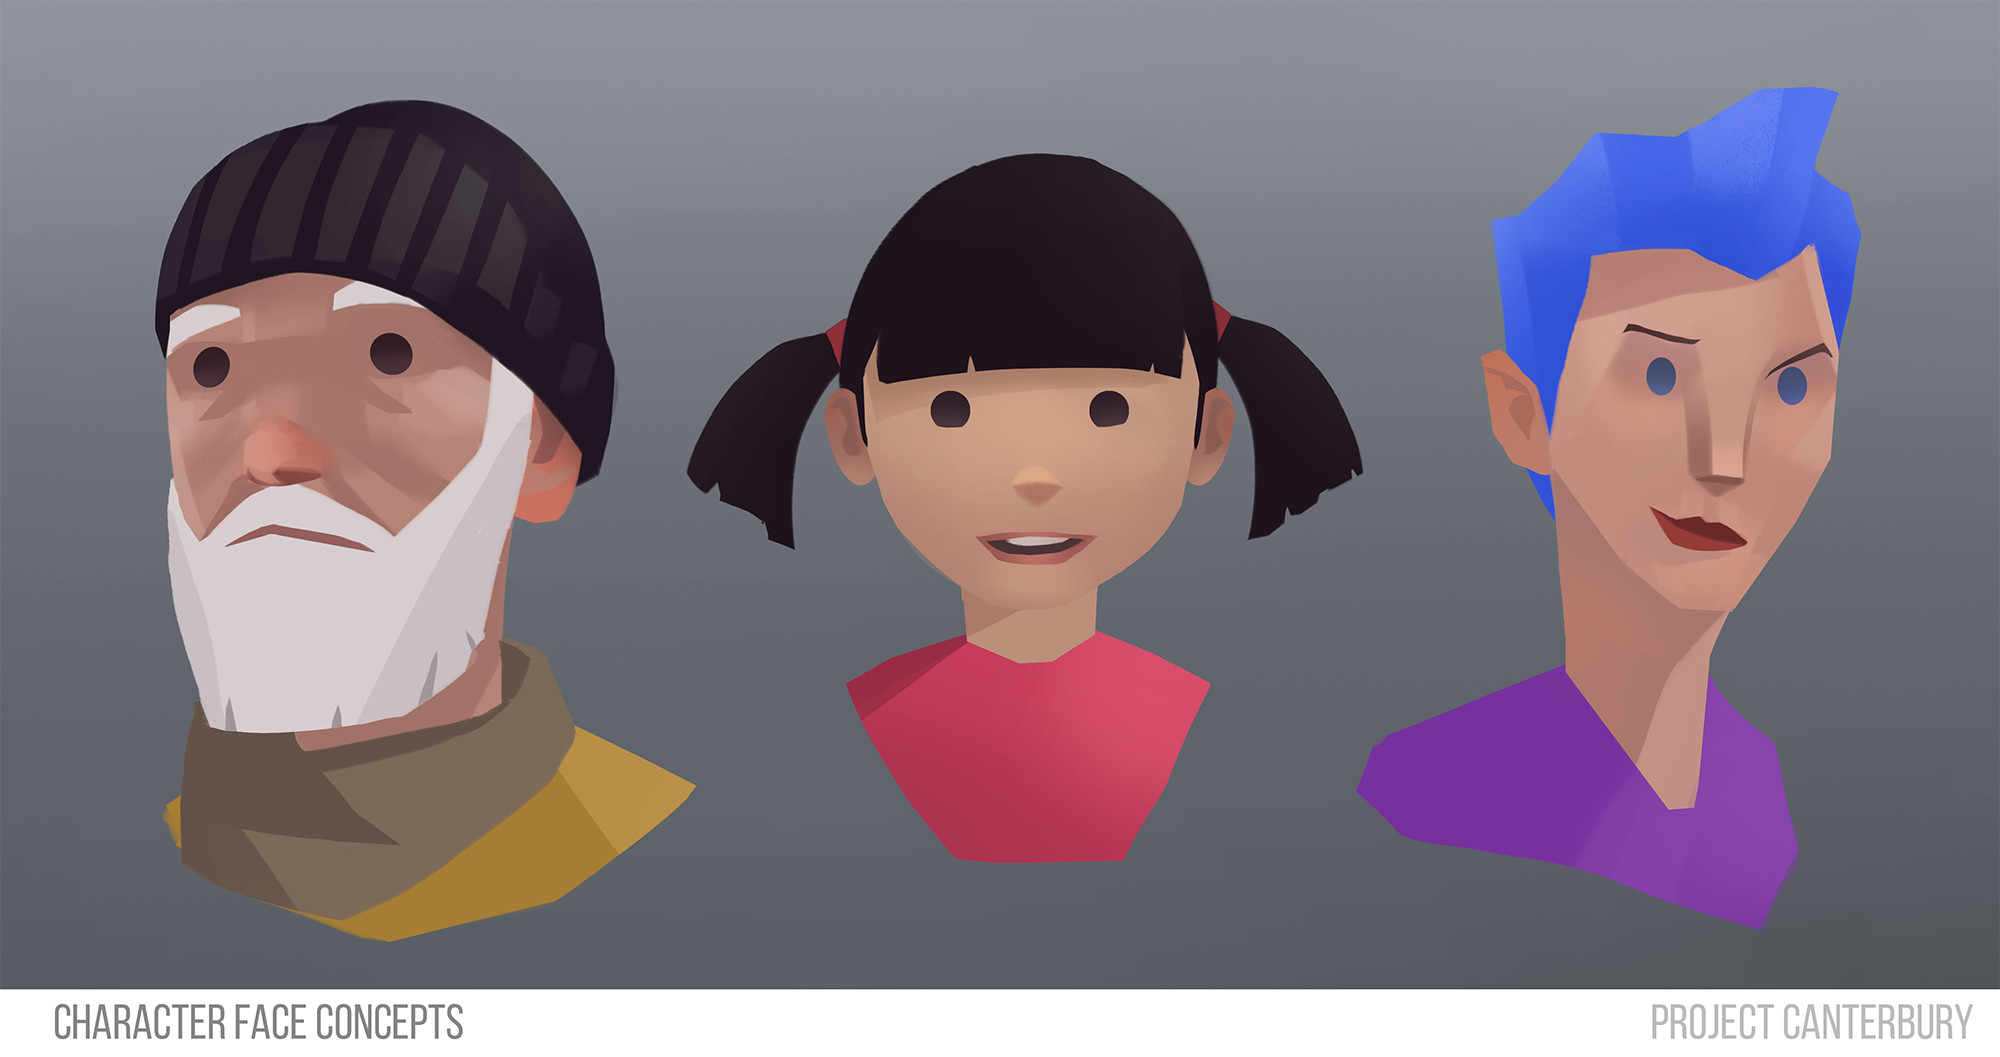 Avatar exploration for Project Canterbury.